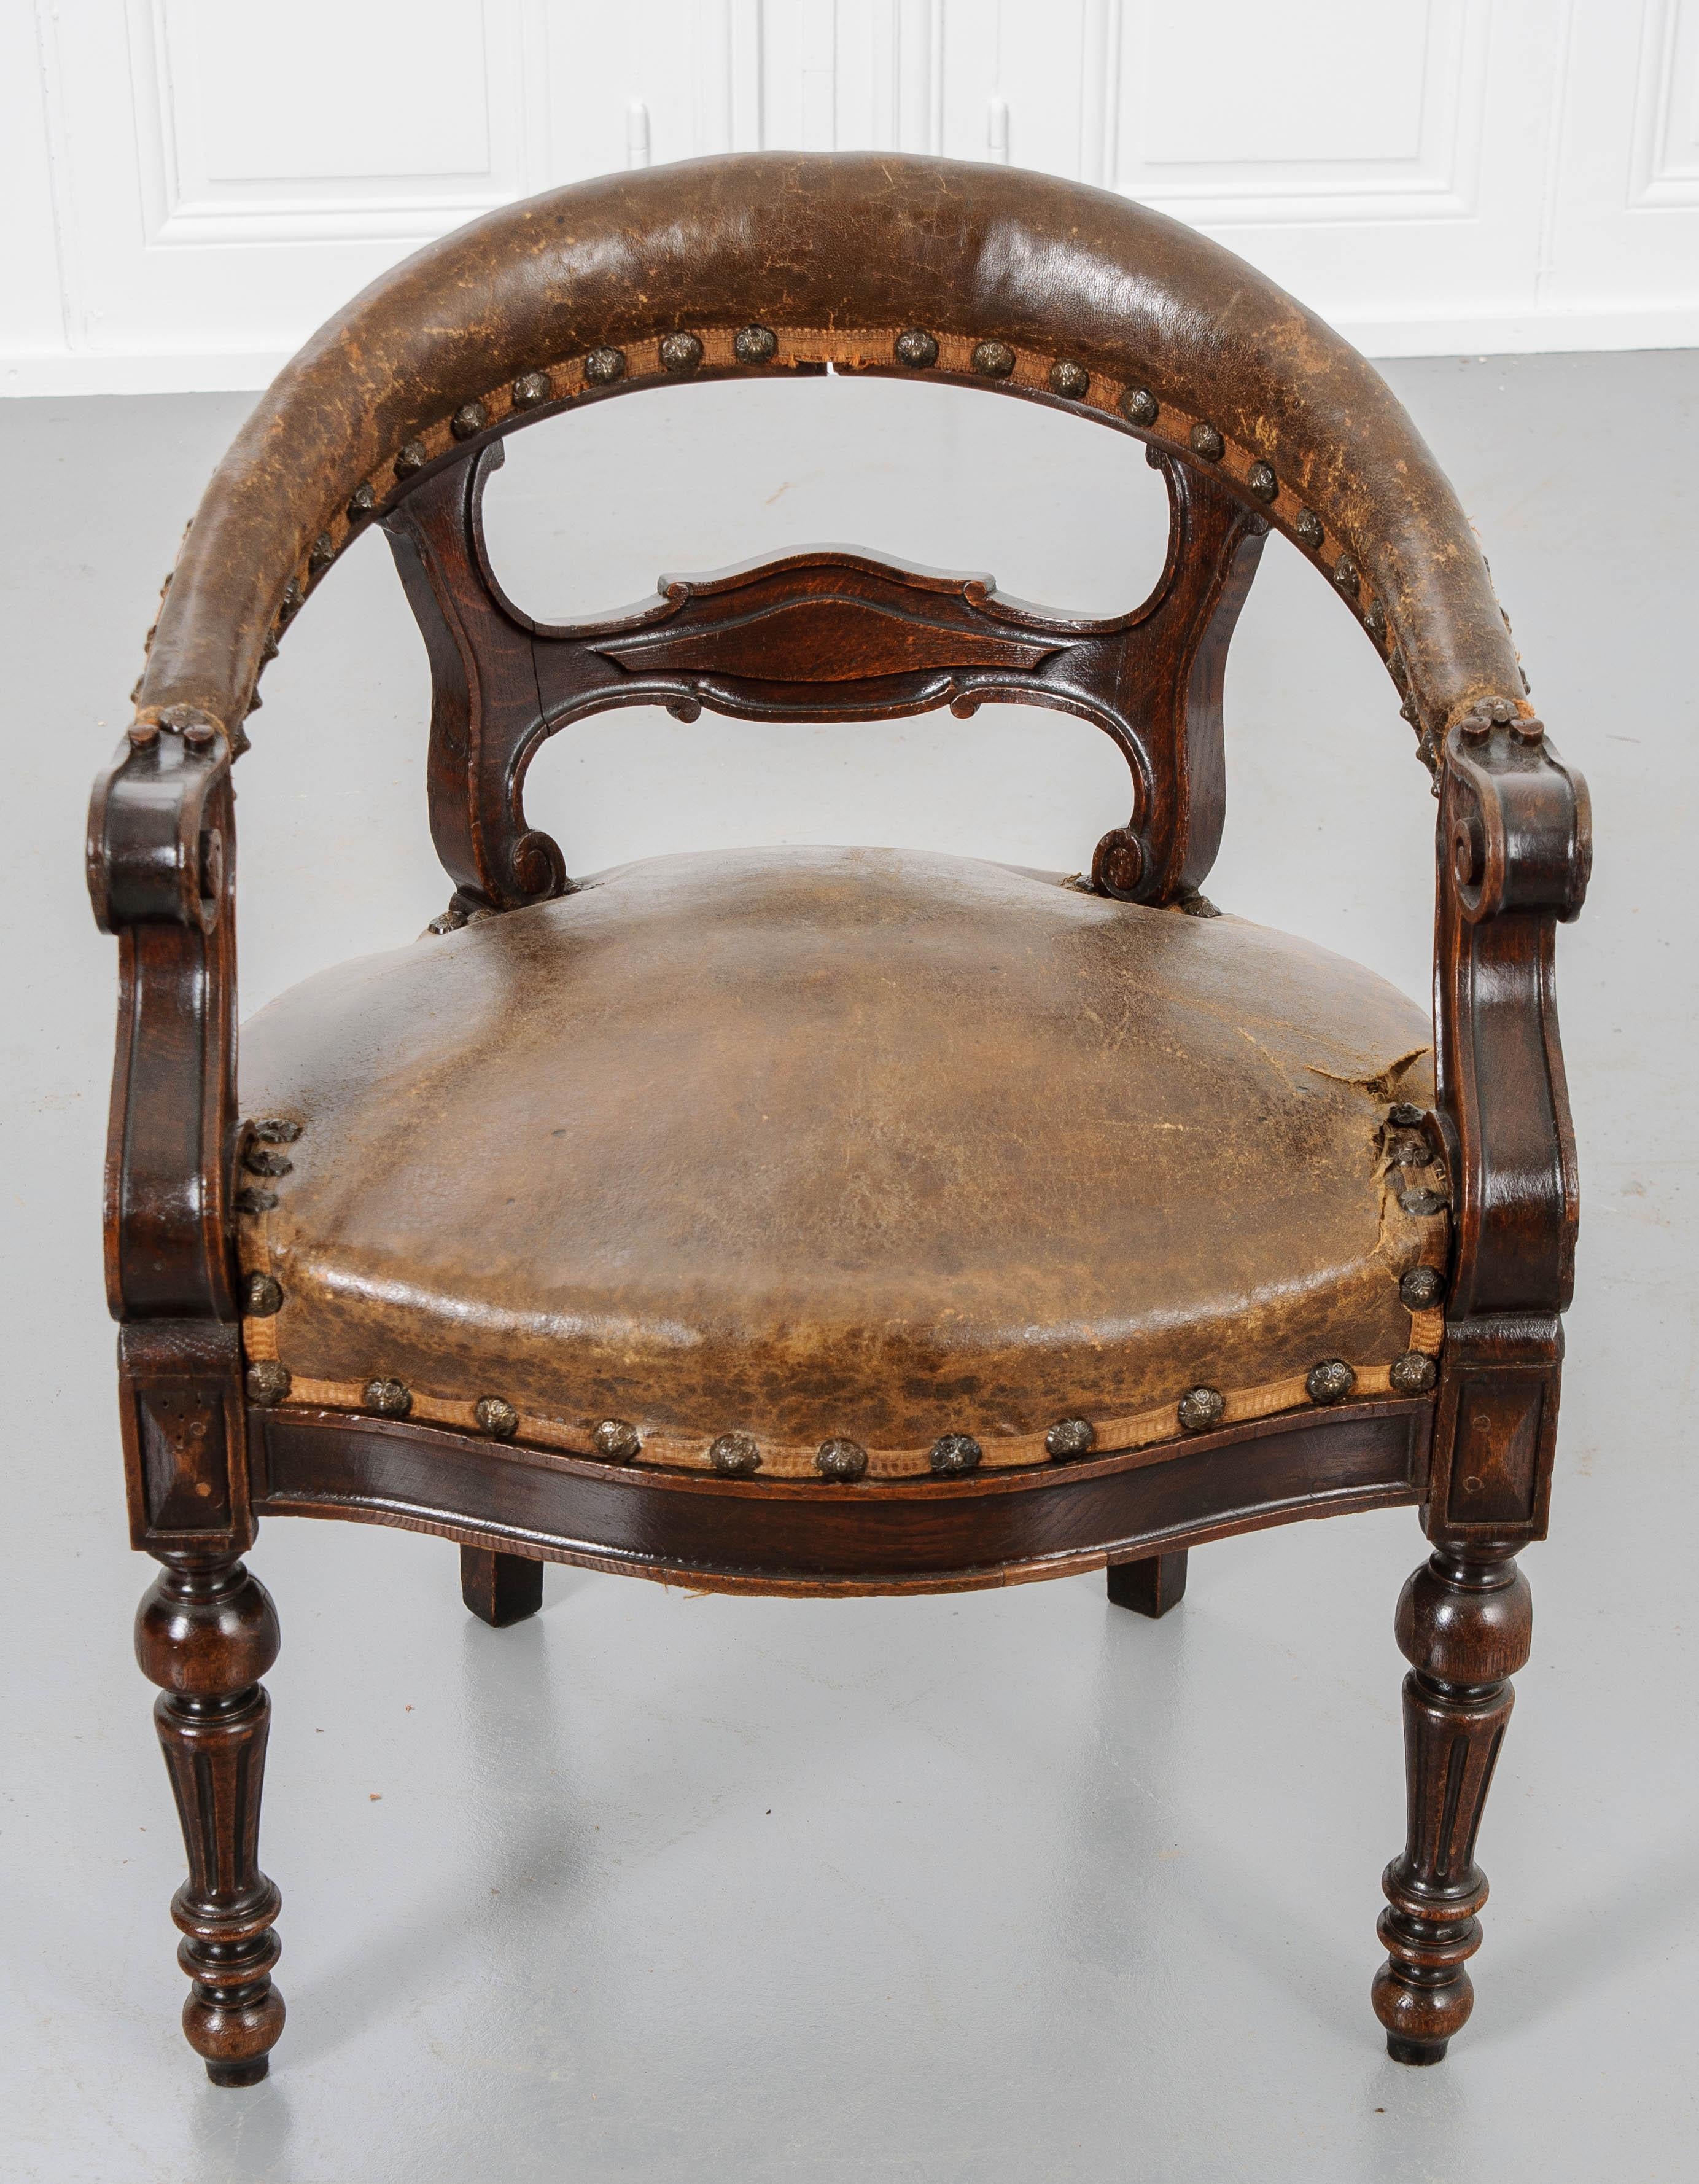 This handsome tub chair, c. 1830, is made of beautiful English oak and has wonderfully aged leather upholstery.  The clean wood finish juxtaposed against the patinated leather and architectural nail heads make for an attractive chair.  Sit into the